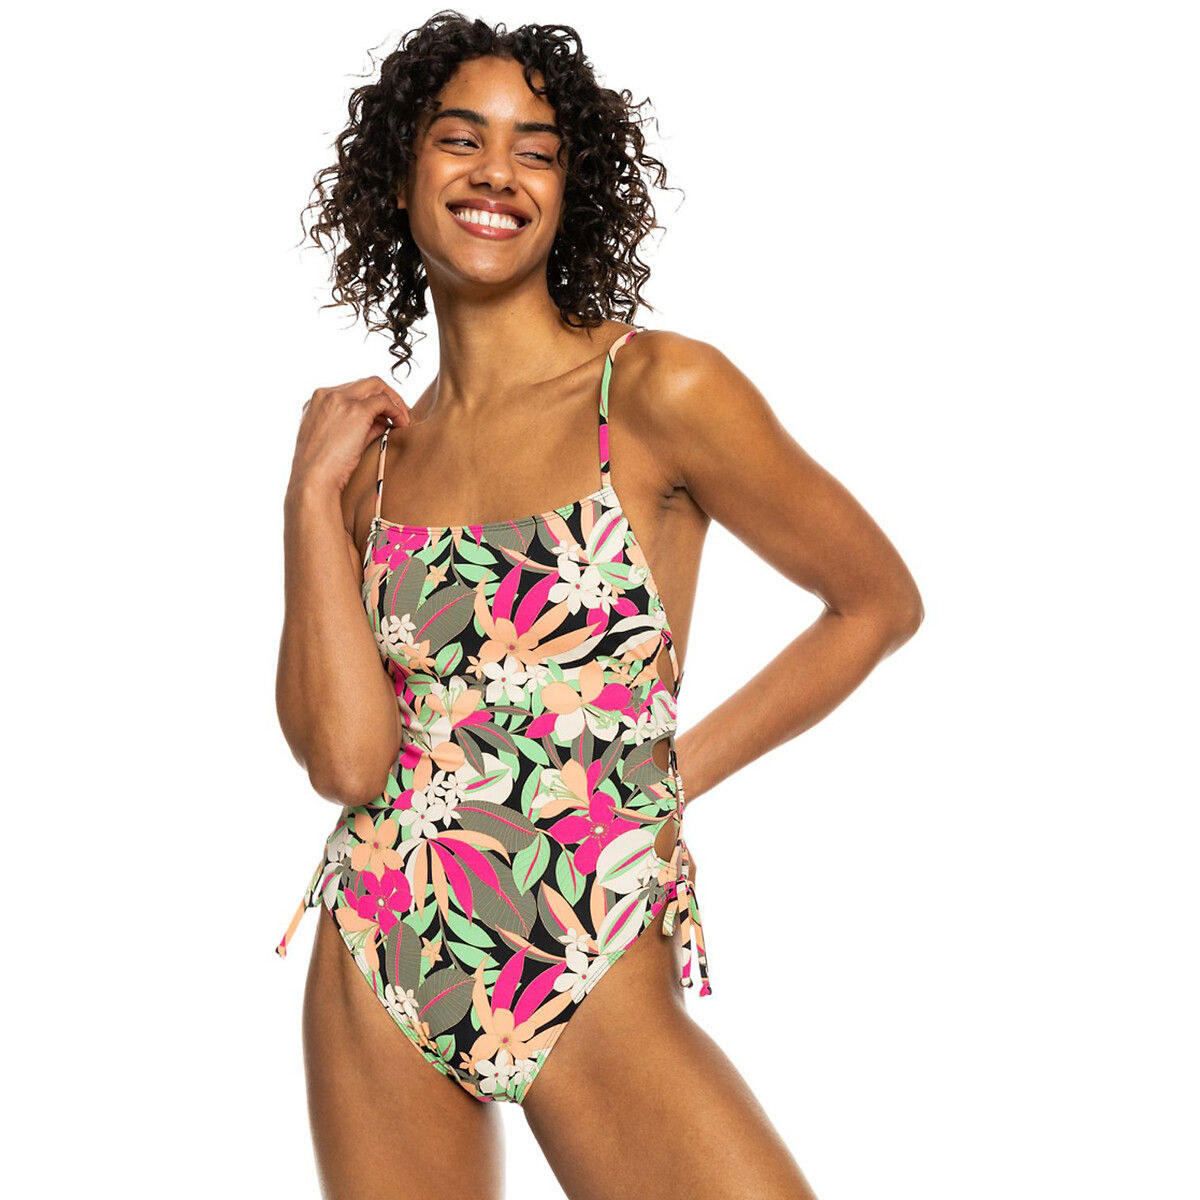 Classics Lace Up Op Recycled Swimsuit